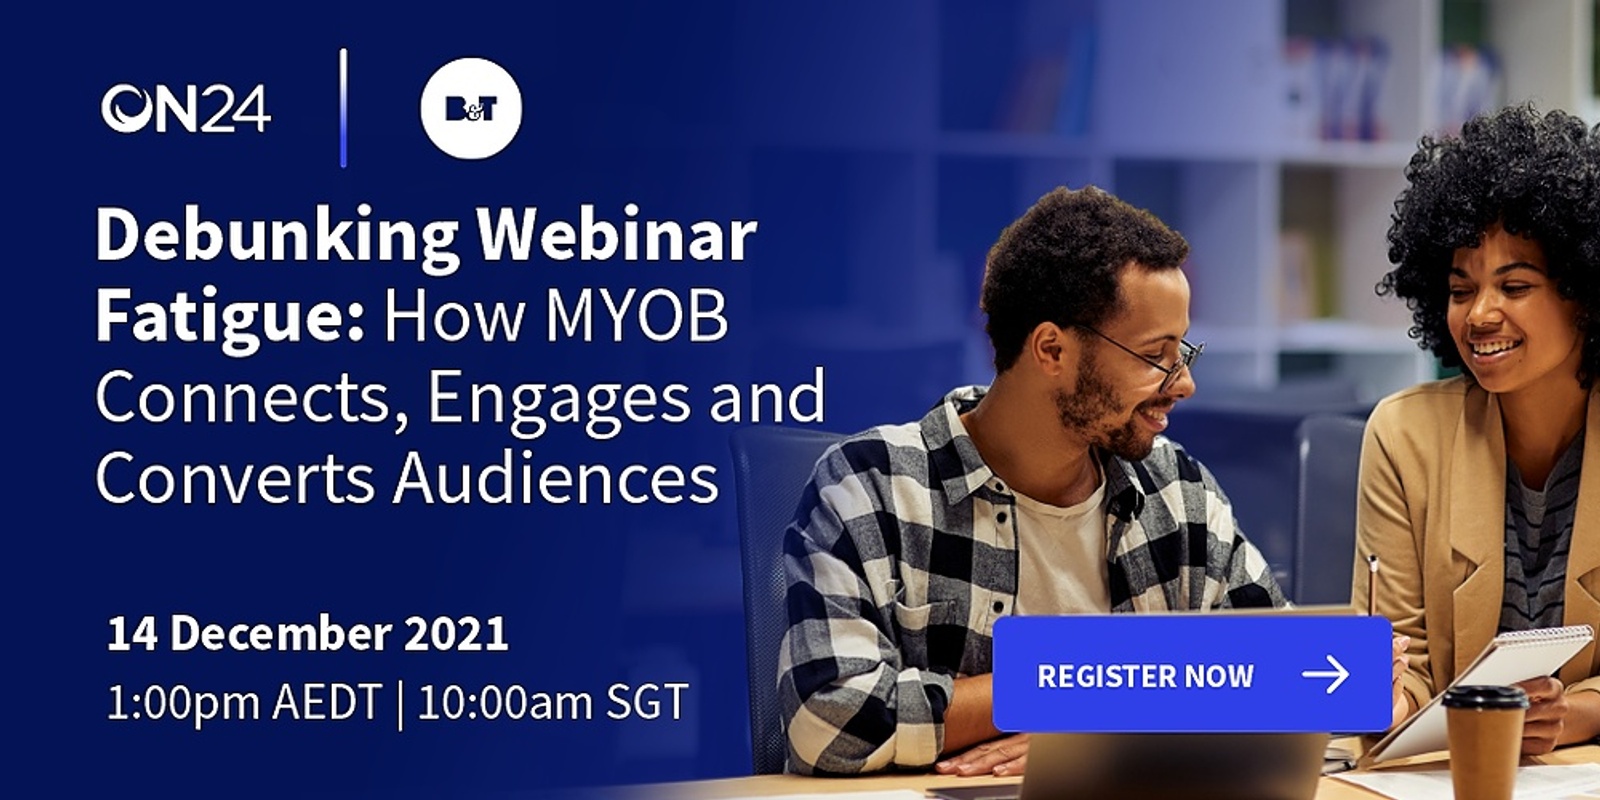 Banner image for B&T Webinar, in partnership with ON24 - Fireside Chat with MYOB